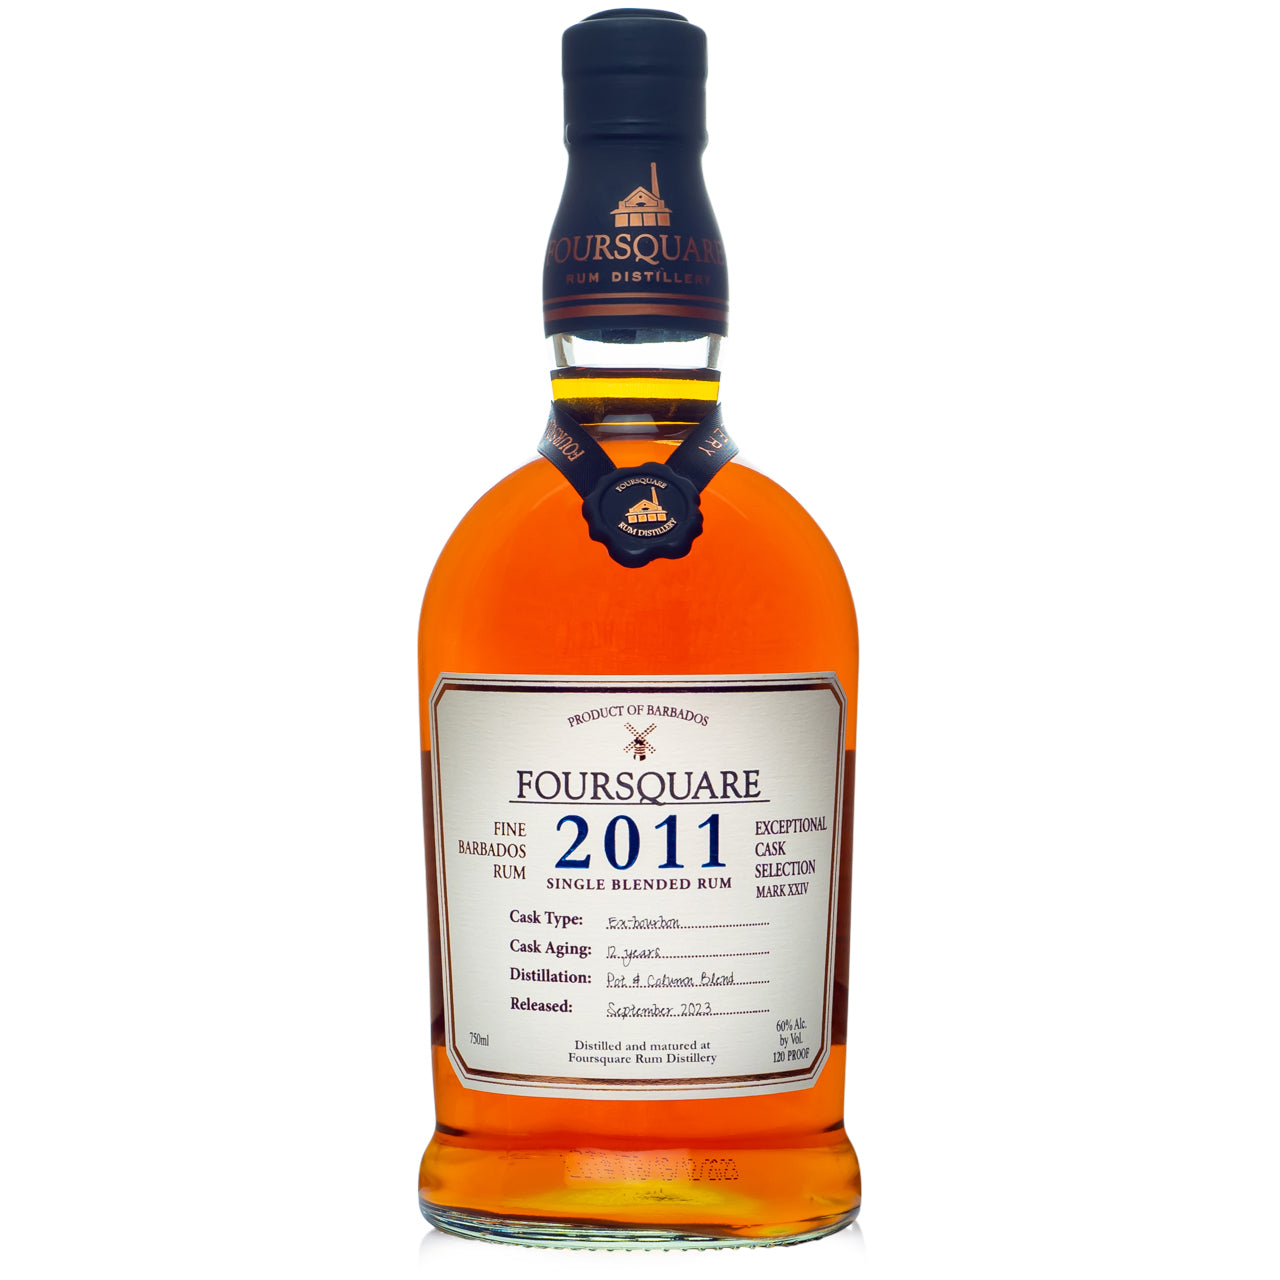 Foursquare 12 Year Exceptional Cask Mark XXIV 2011 Rum